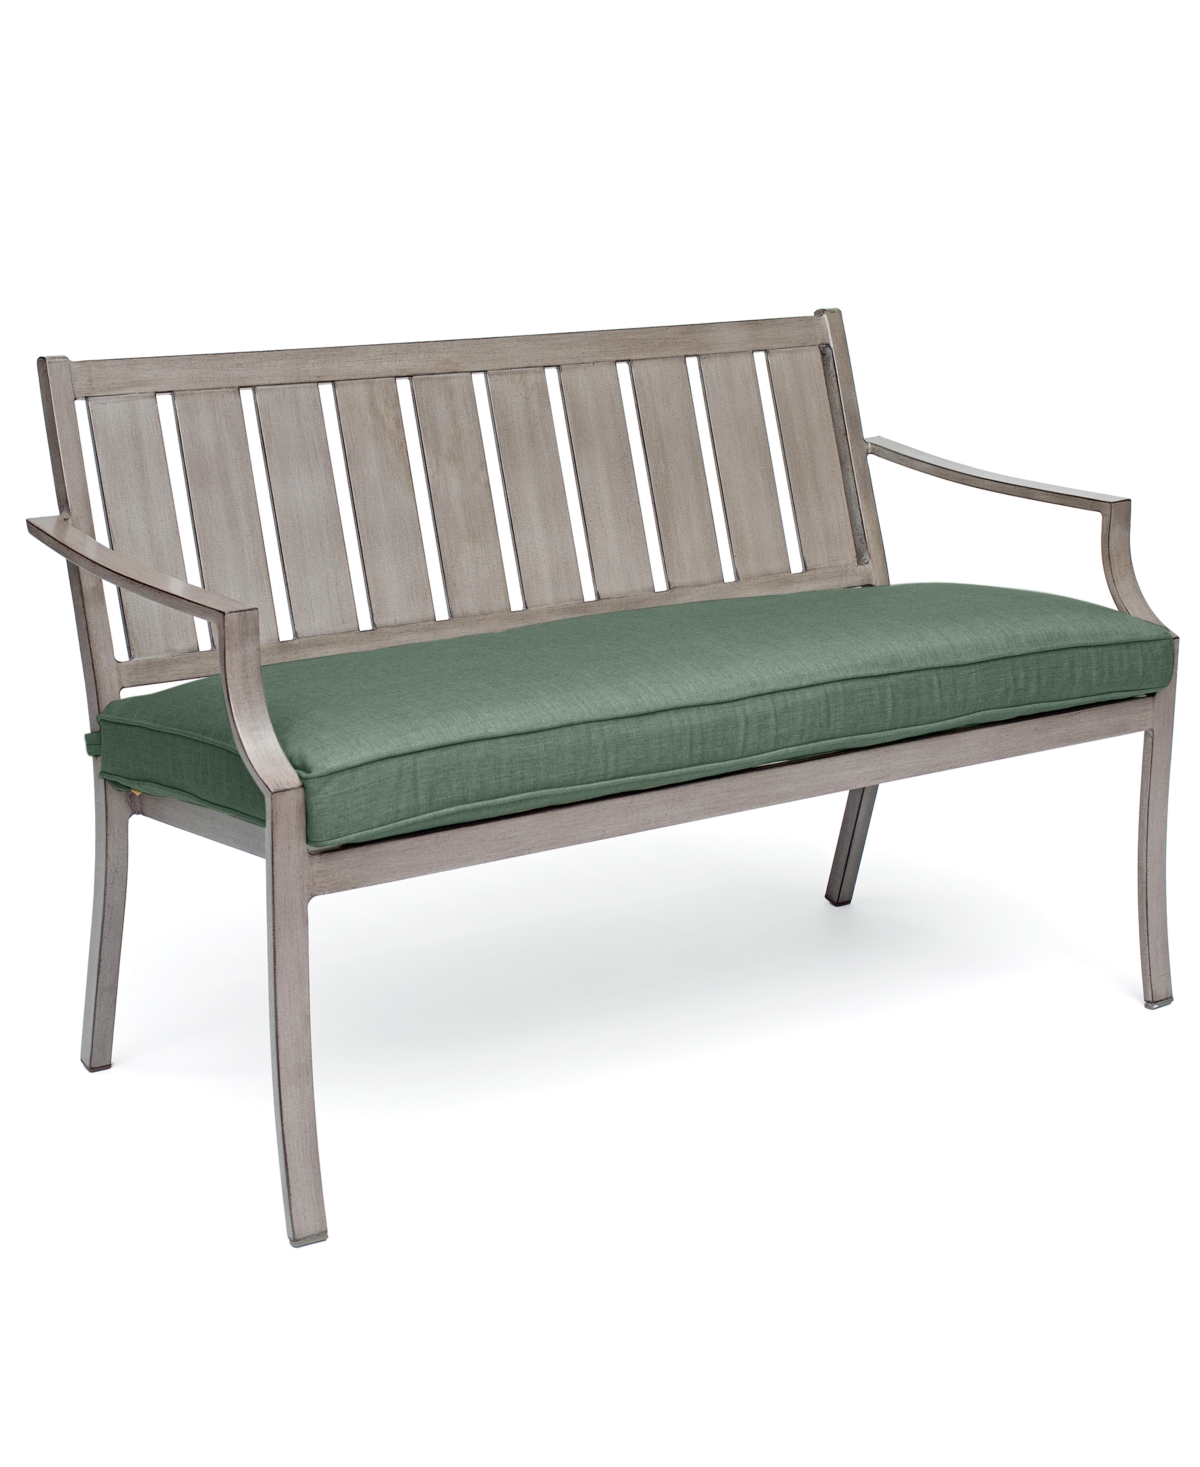 Shop Agio Wayland Outdoor Bench, Created For Macy's In Outdura Grasshopper